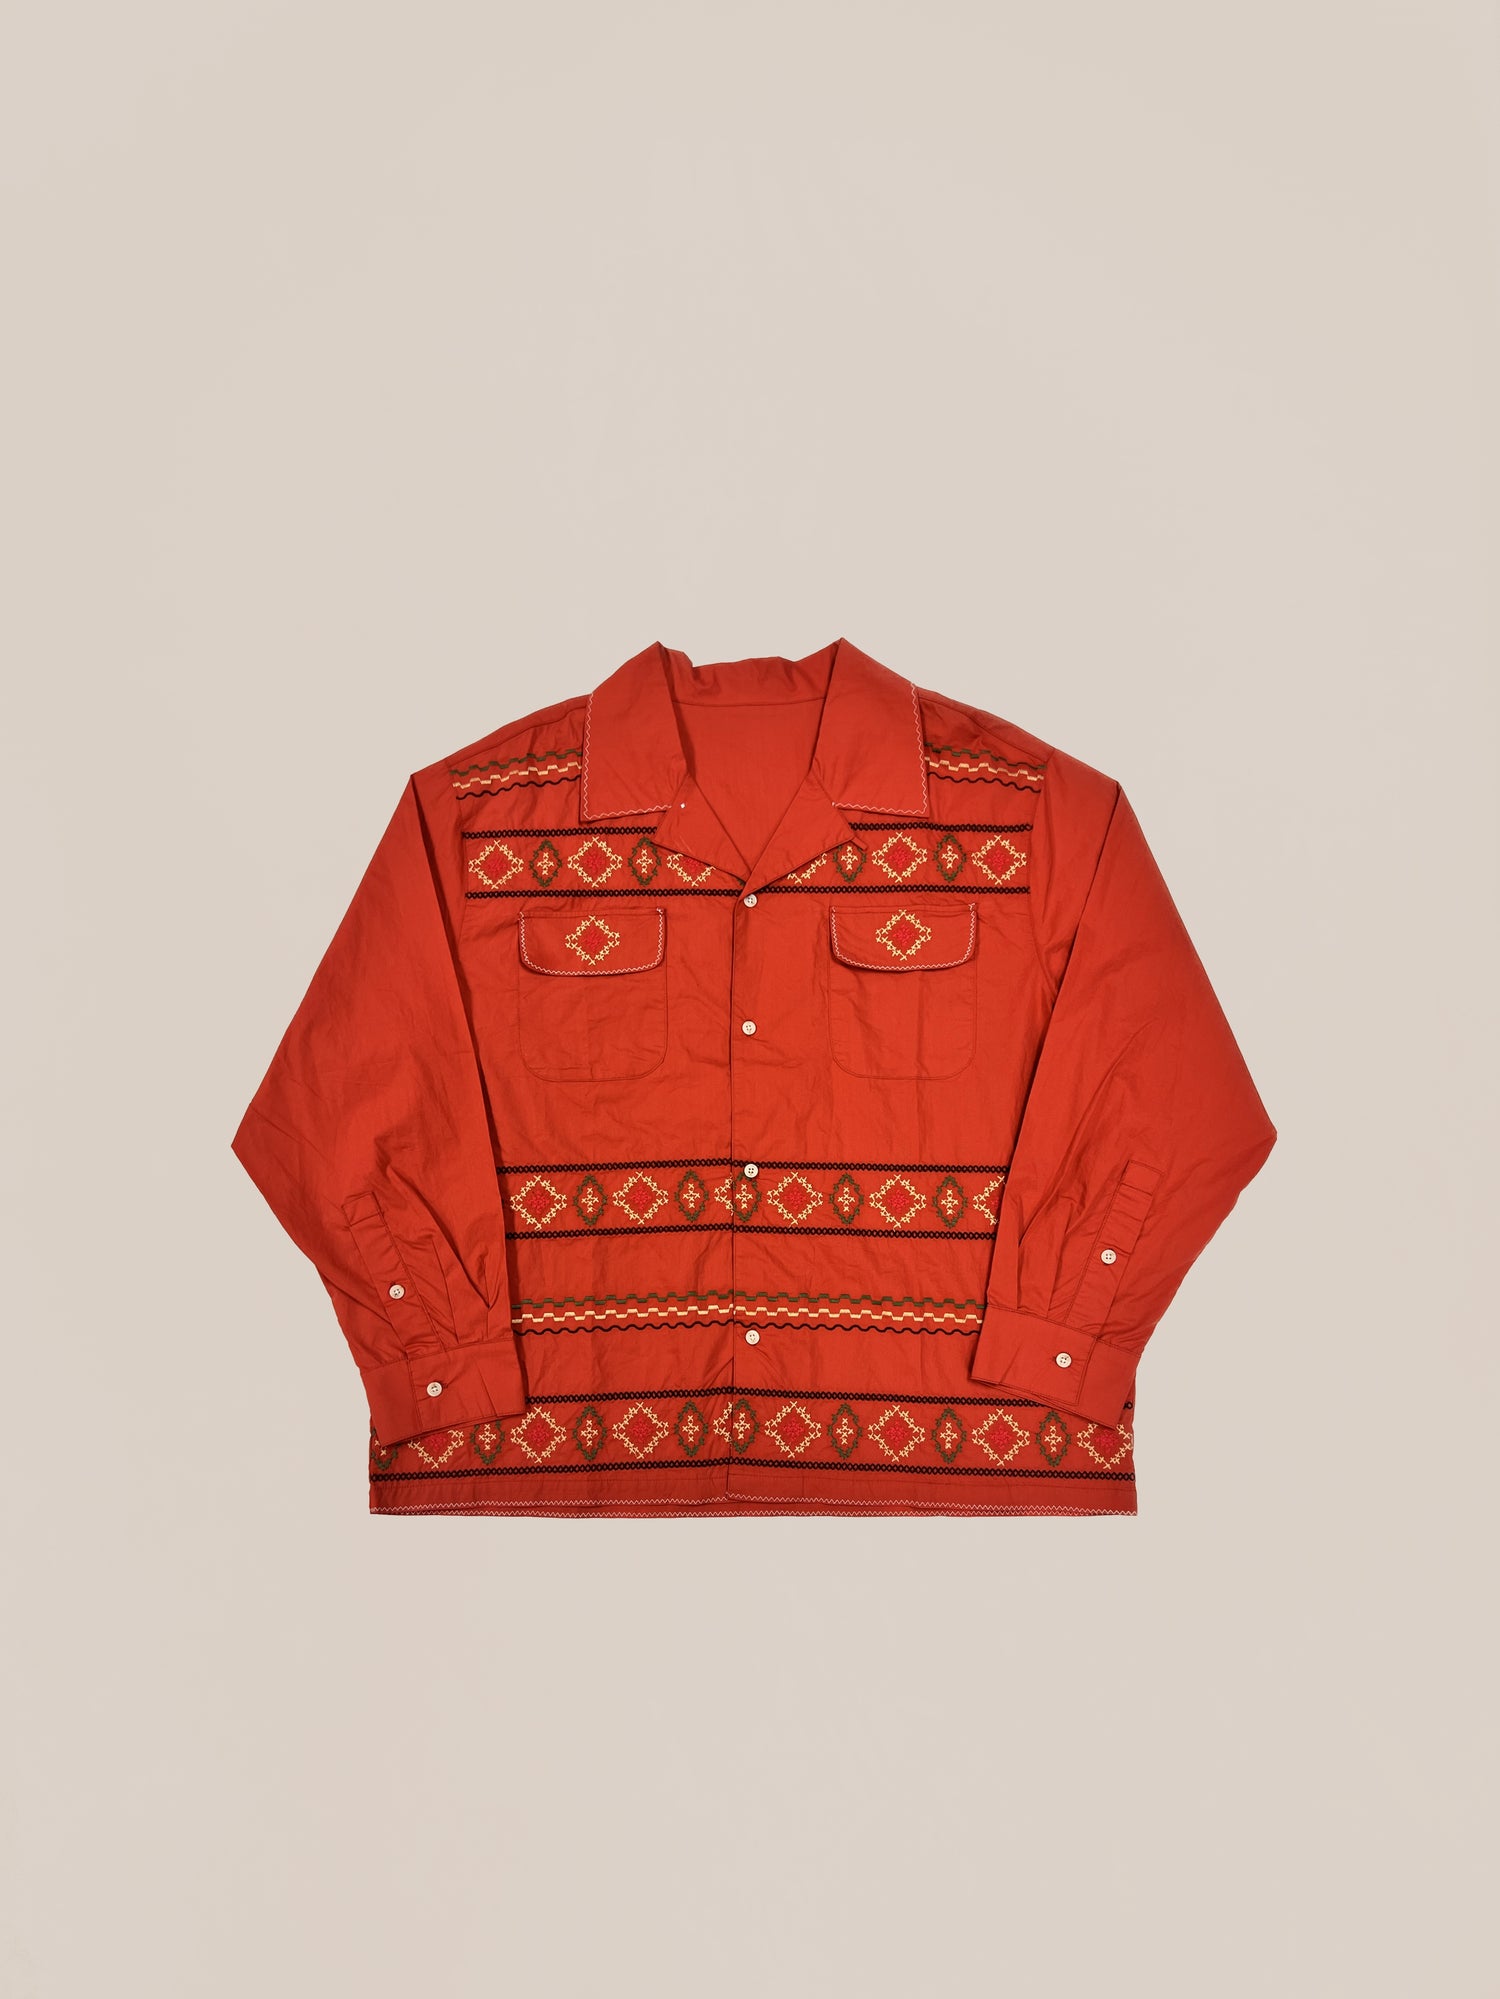 Sample 48 (Red Western Button Down) by Profound laid out flat against a neutral background.